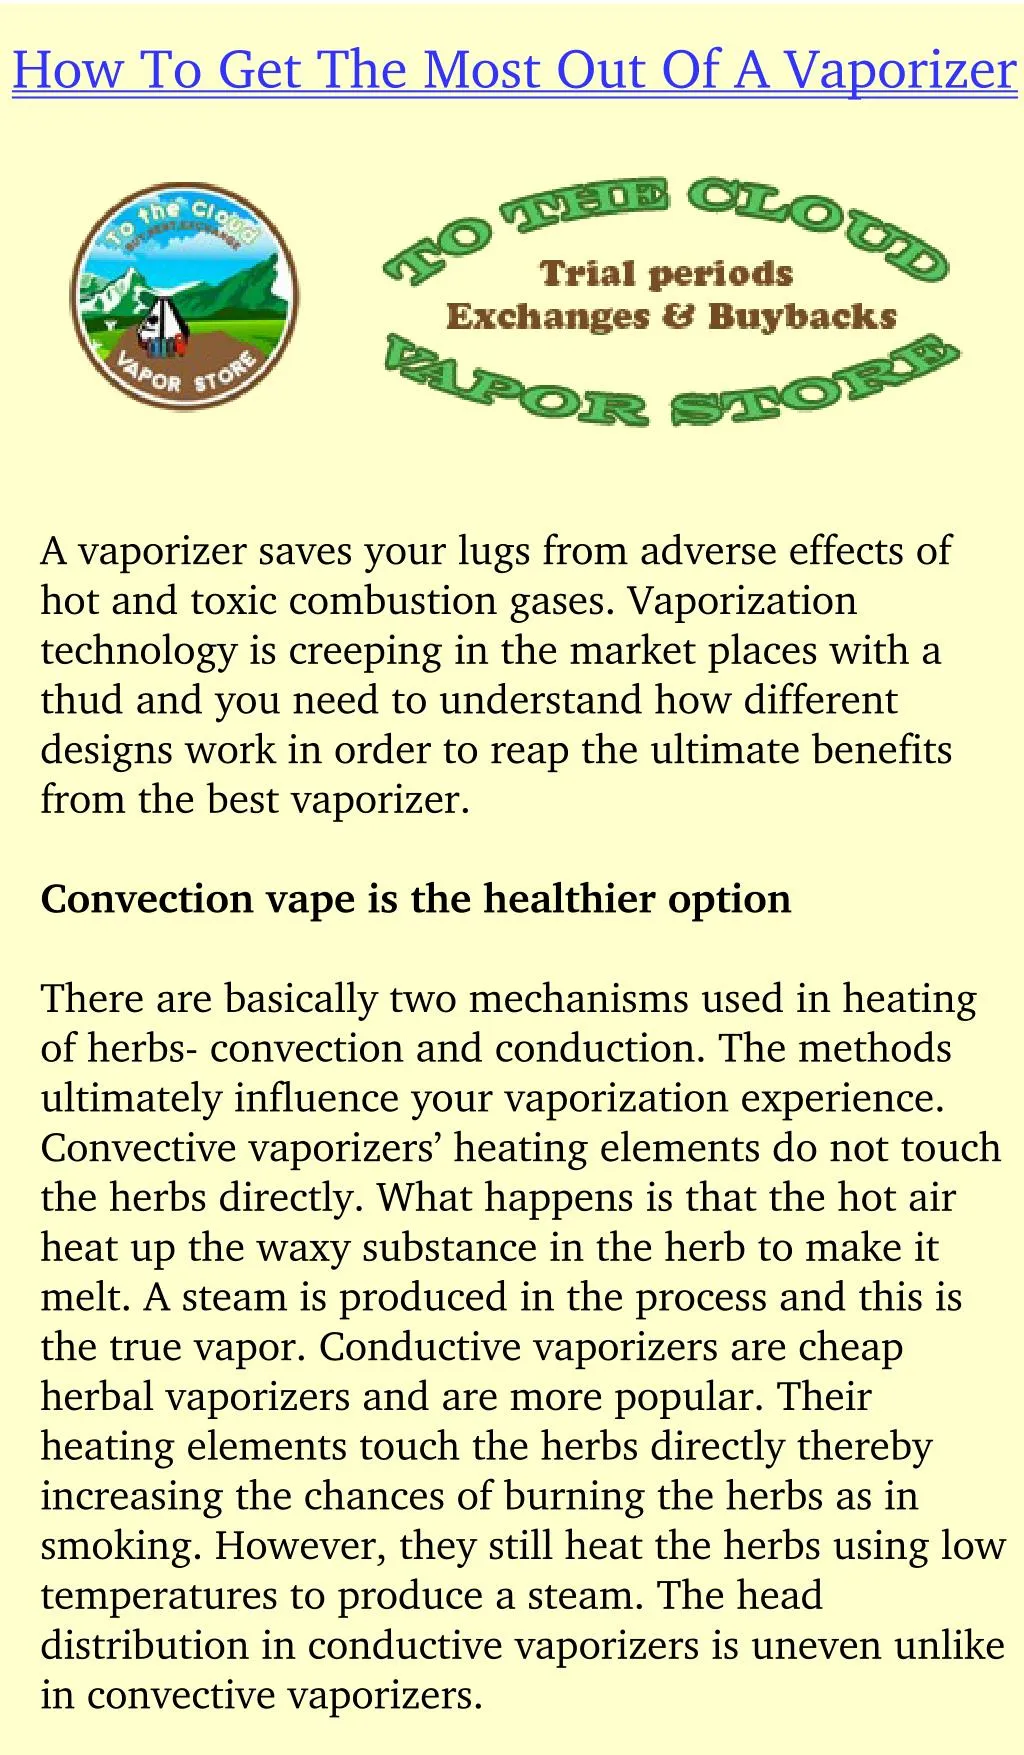 how to get the most out of a vaporizer